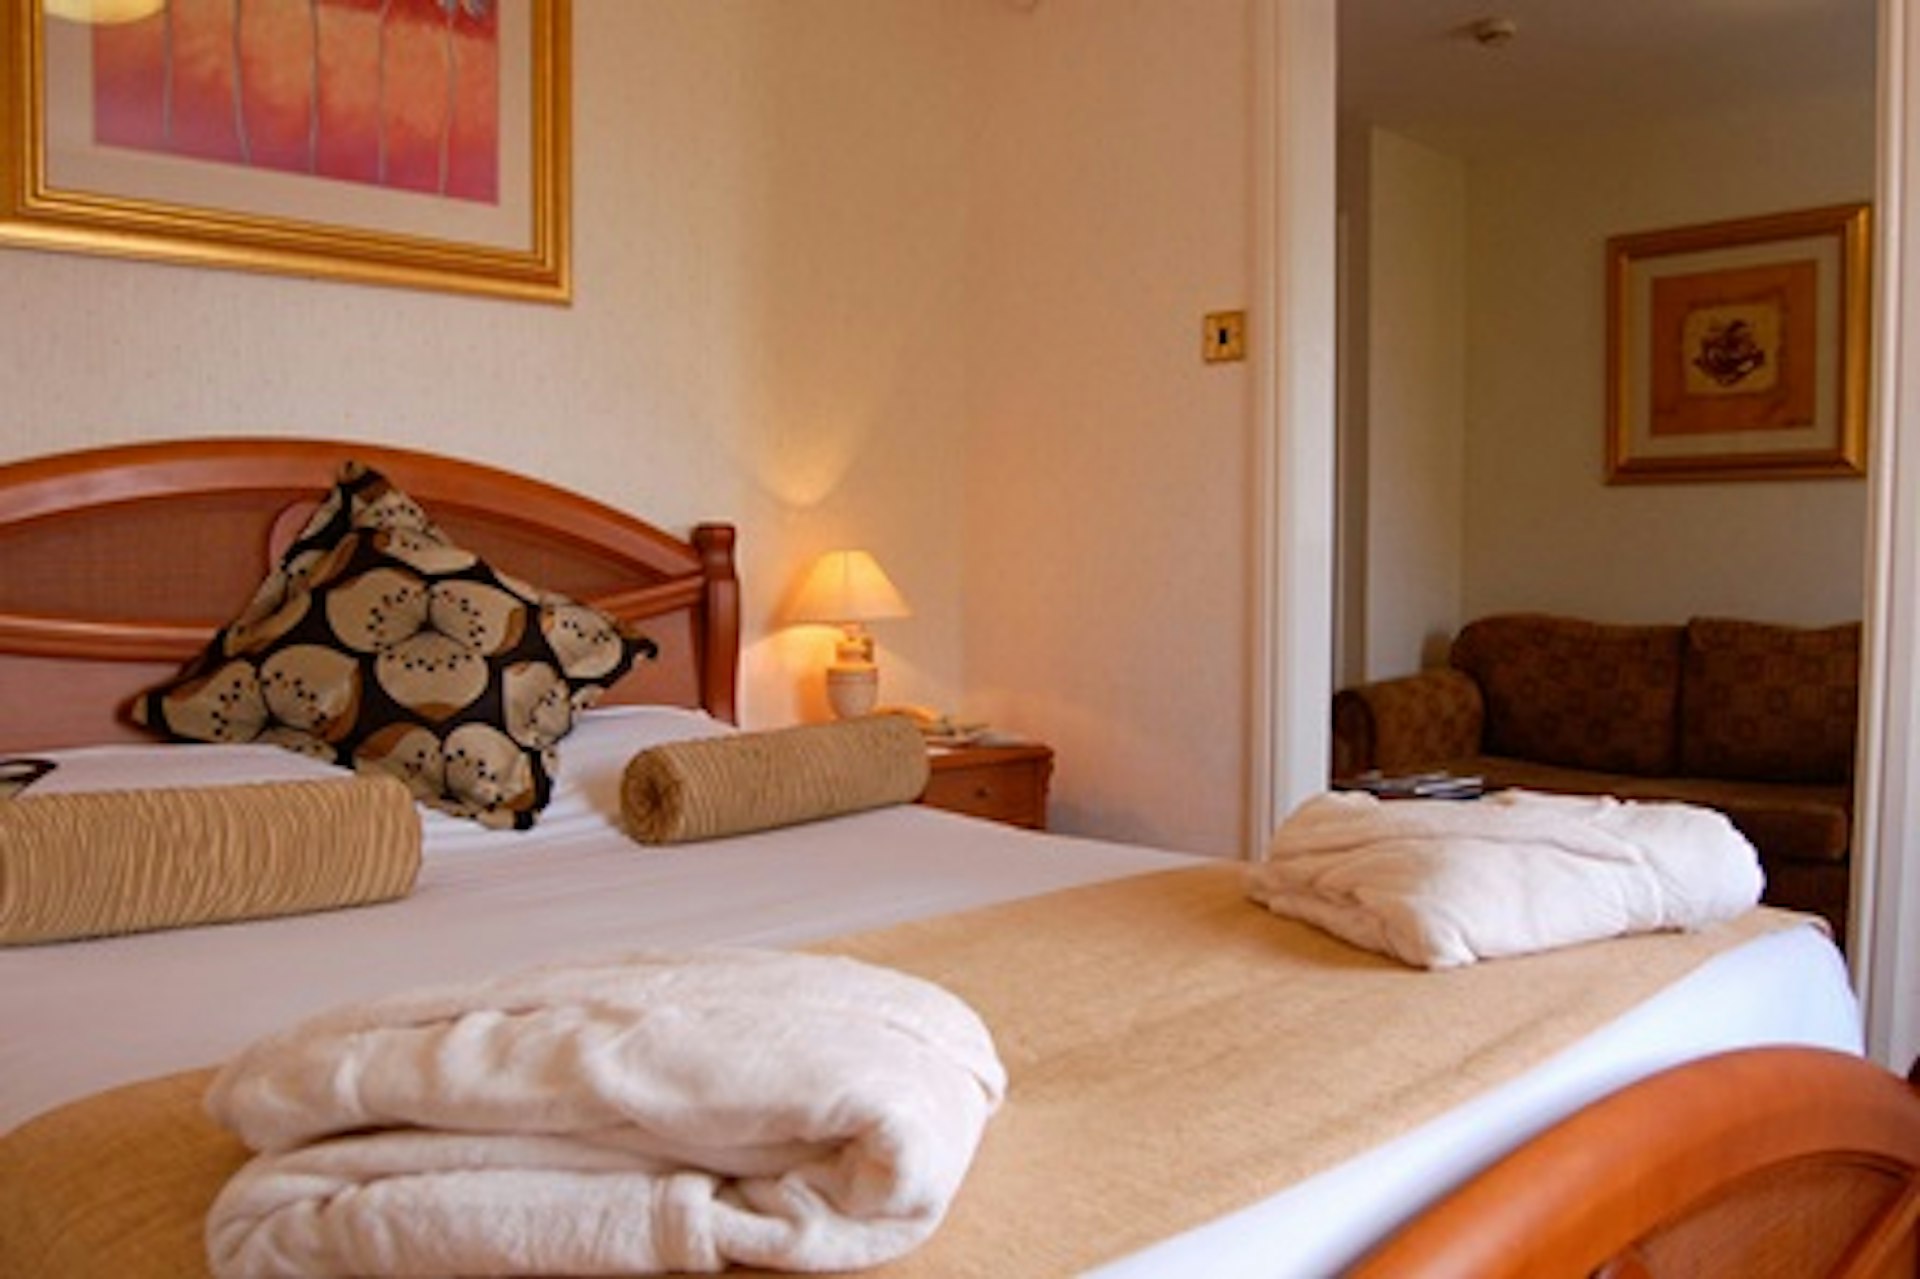 One Night Soothing Spa Break with Dinner and Treatment for Two at Bannatyne Darlington Hotel 3